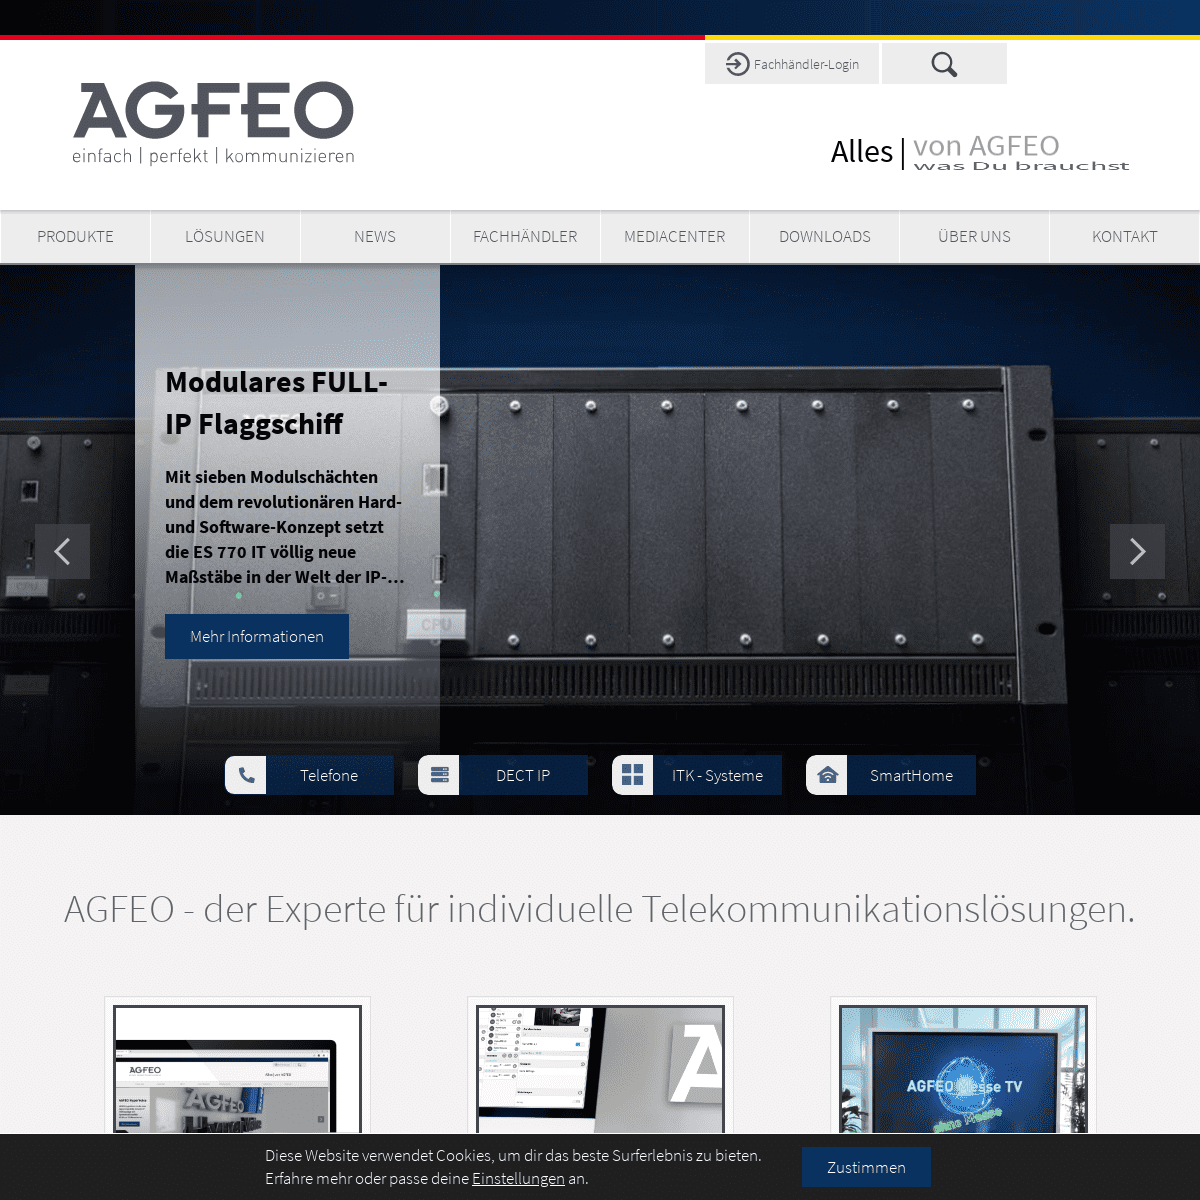 A complete backup of agfeo.de